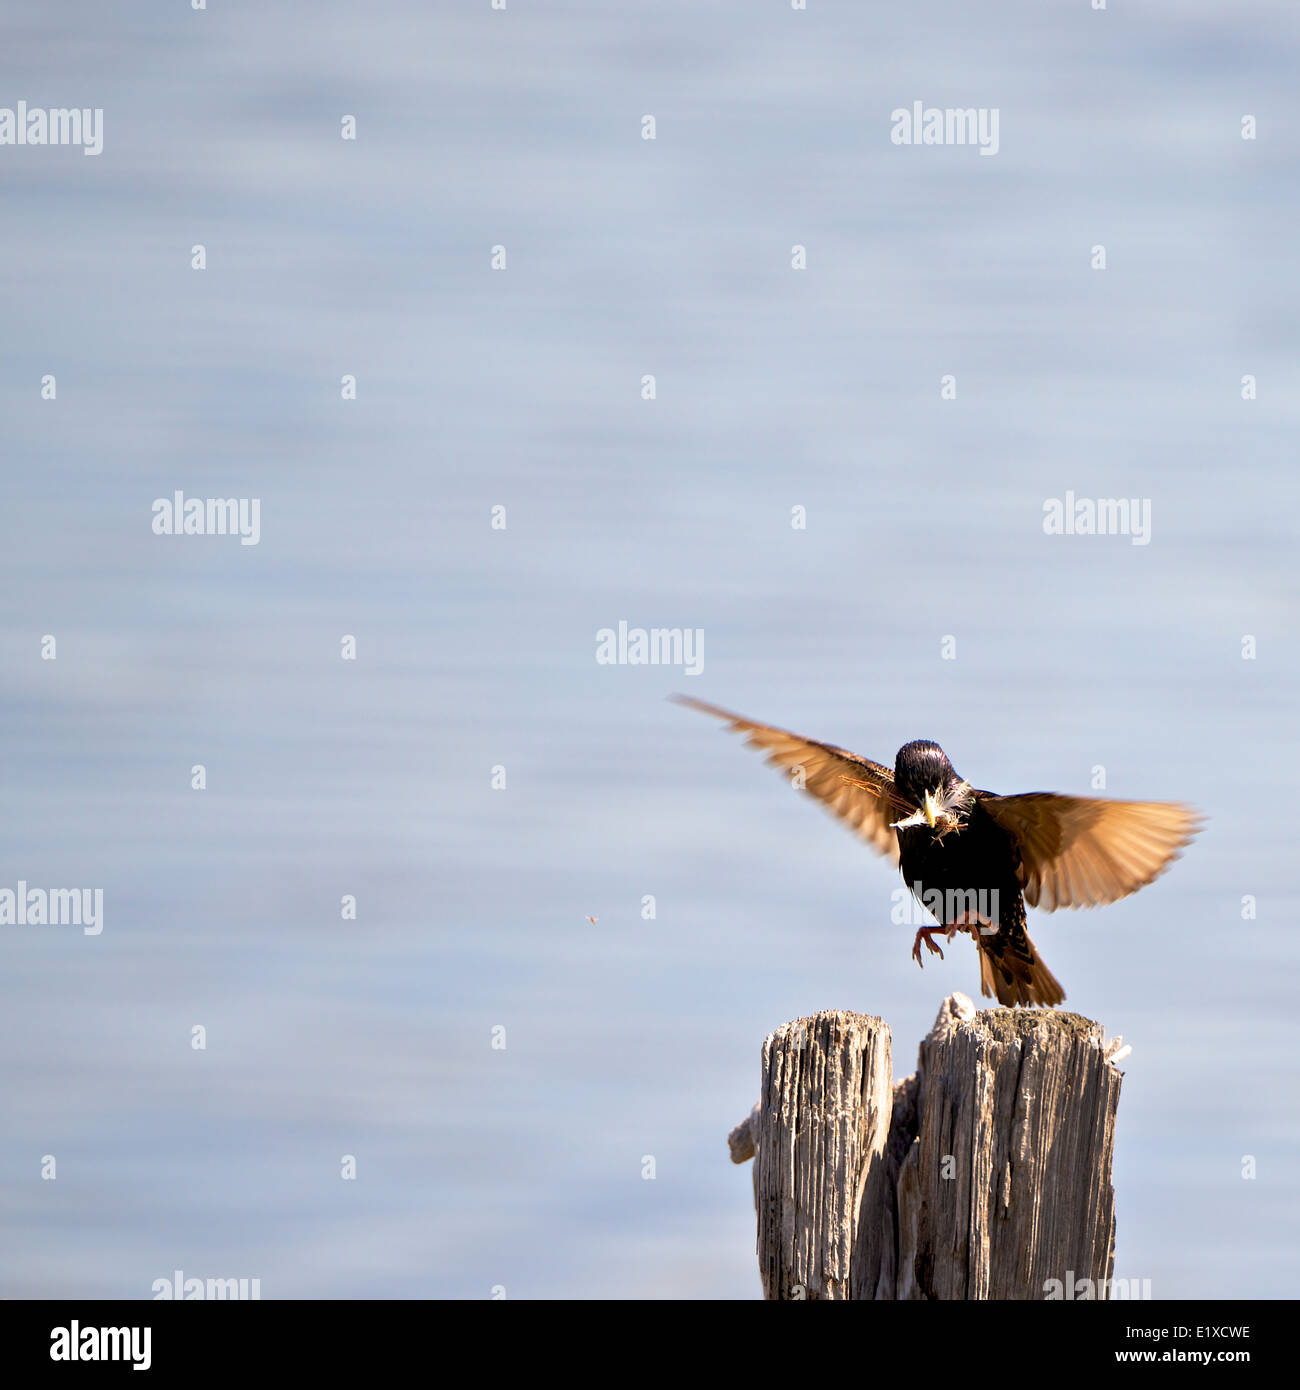 Bird carrying a building material to build a nest. Stock Photo